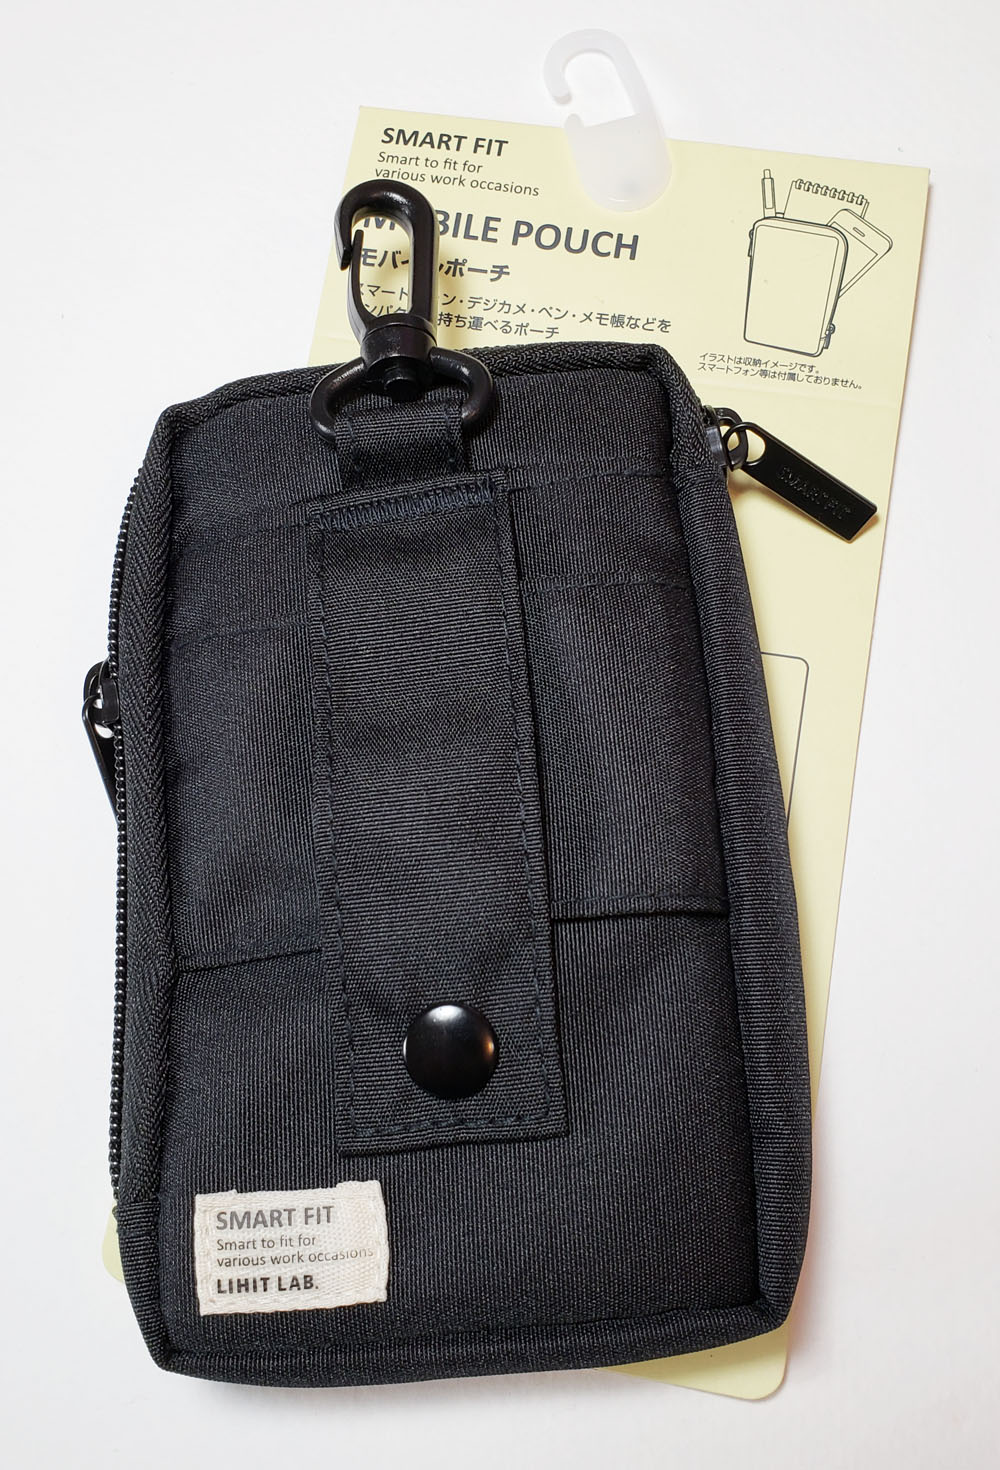 Lihit lab Carrying Pouch Smart Fit A4 Navy A7577-11 